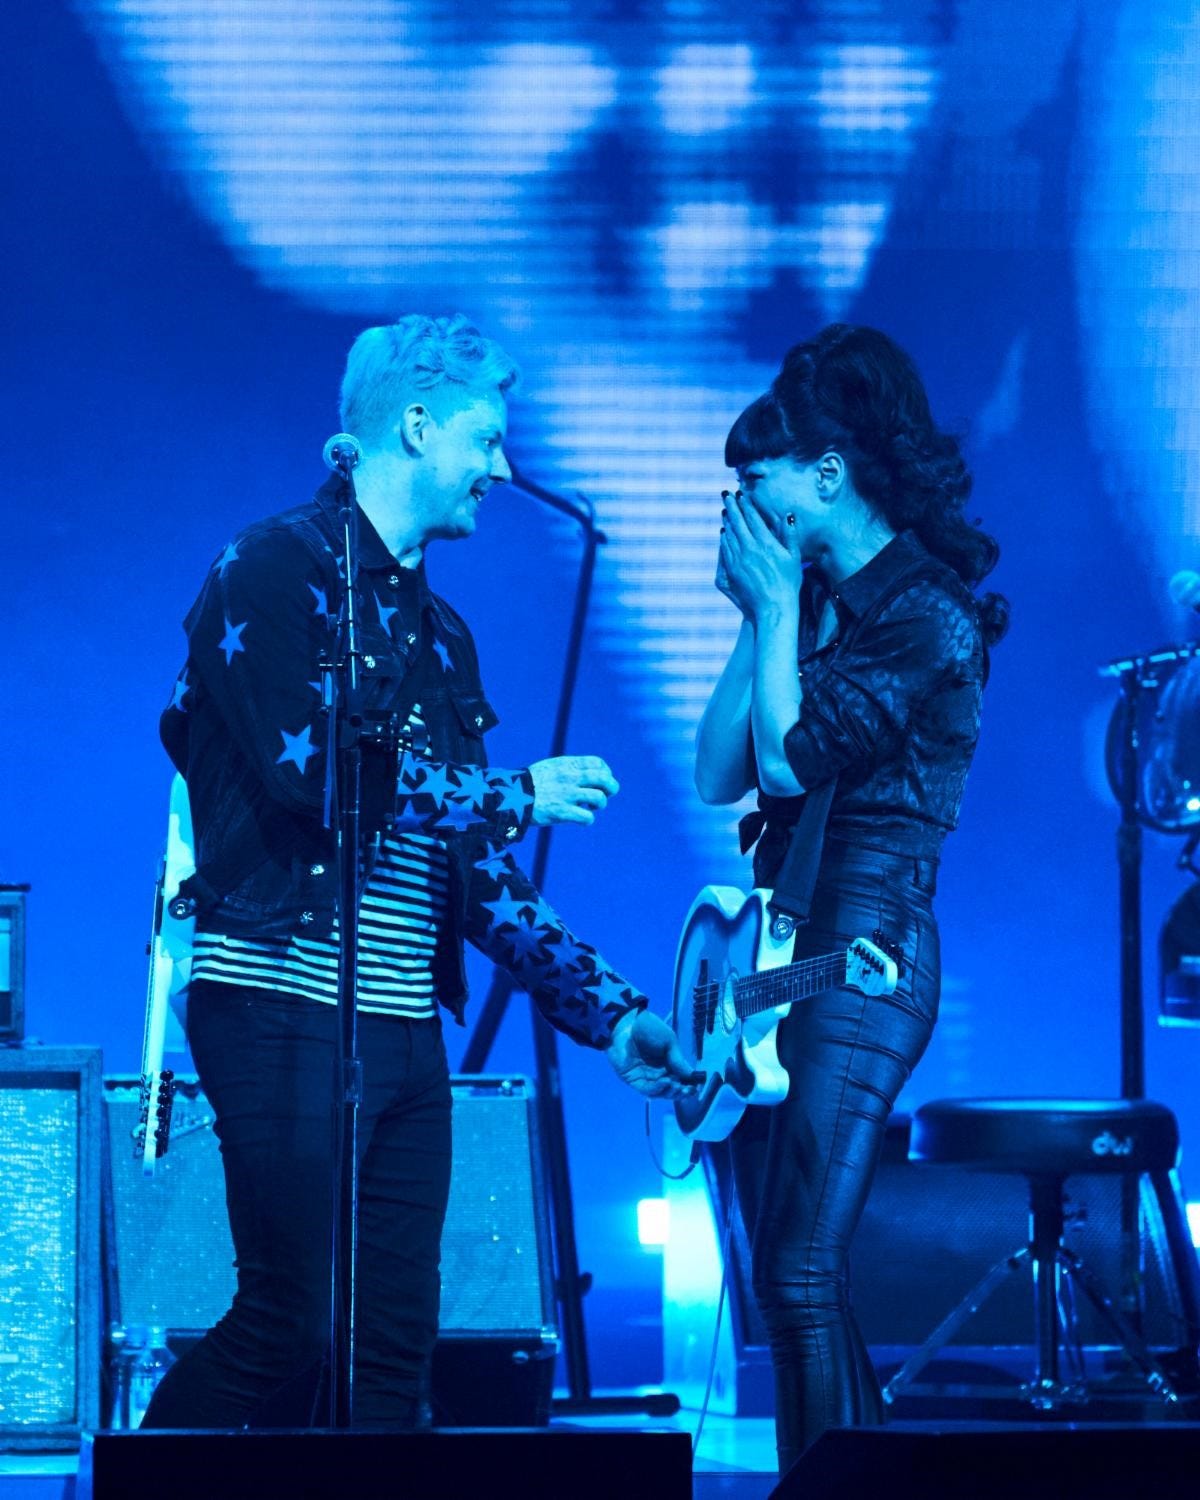 Jack White asks his girlfriend, Olivia Jean, to marry him on stage at Detroit's Masonic Temple on April 8, 2022. She said yes and the two were married in a quickie ceremony on stage minutes later.